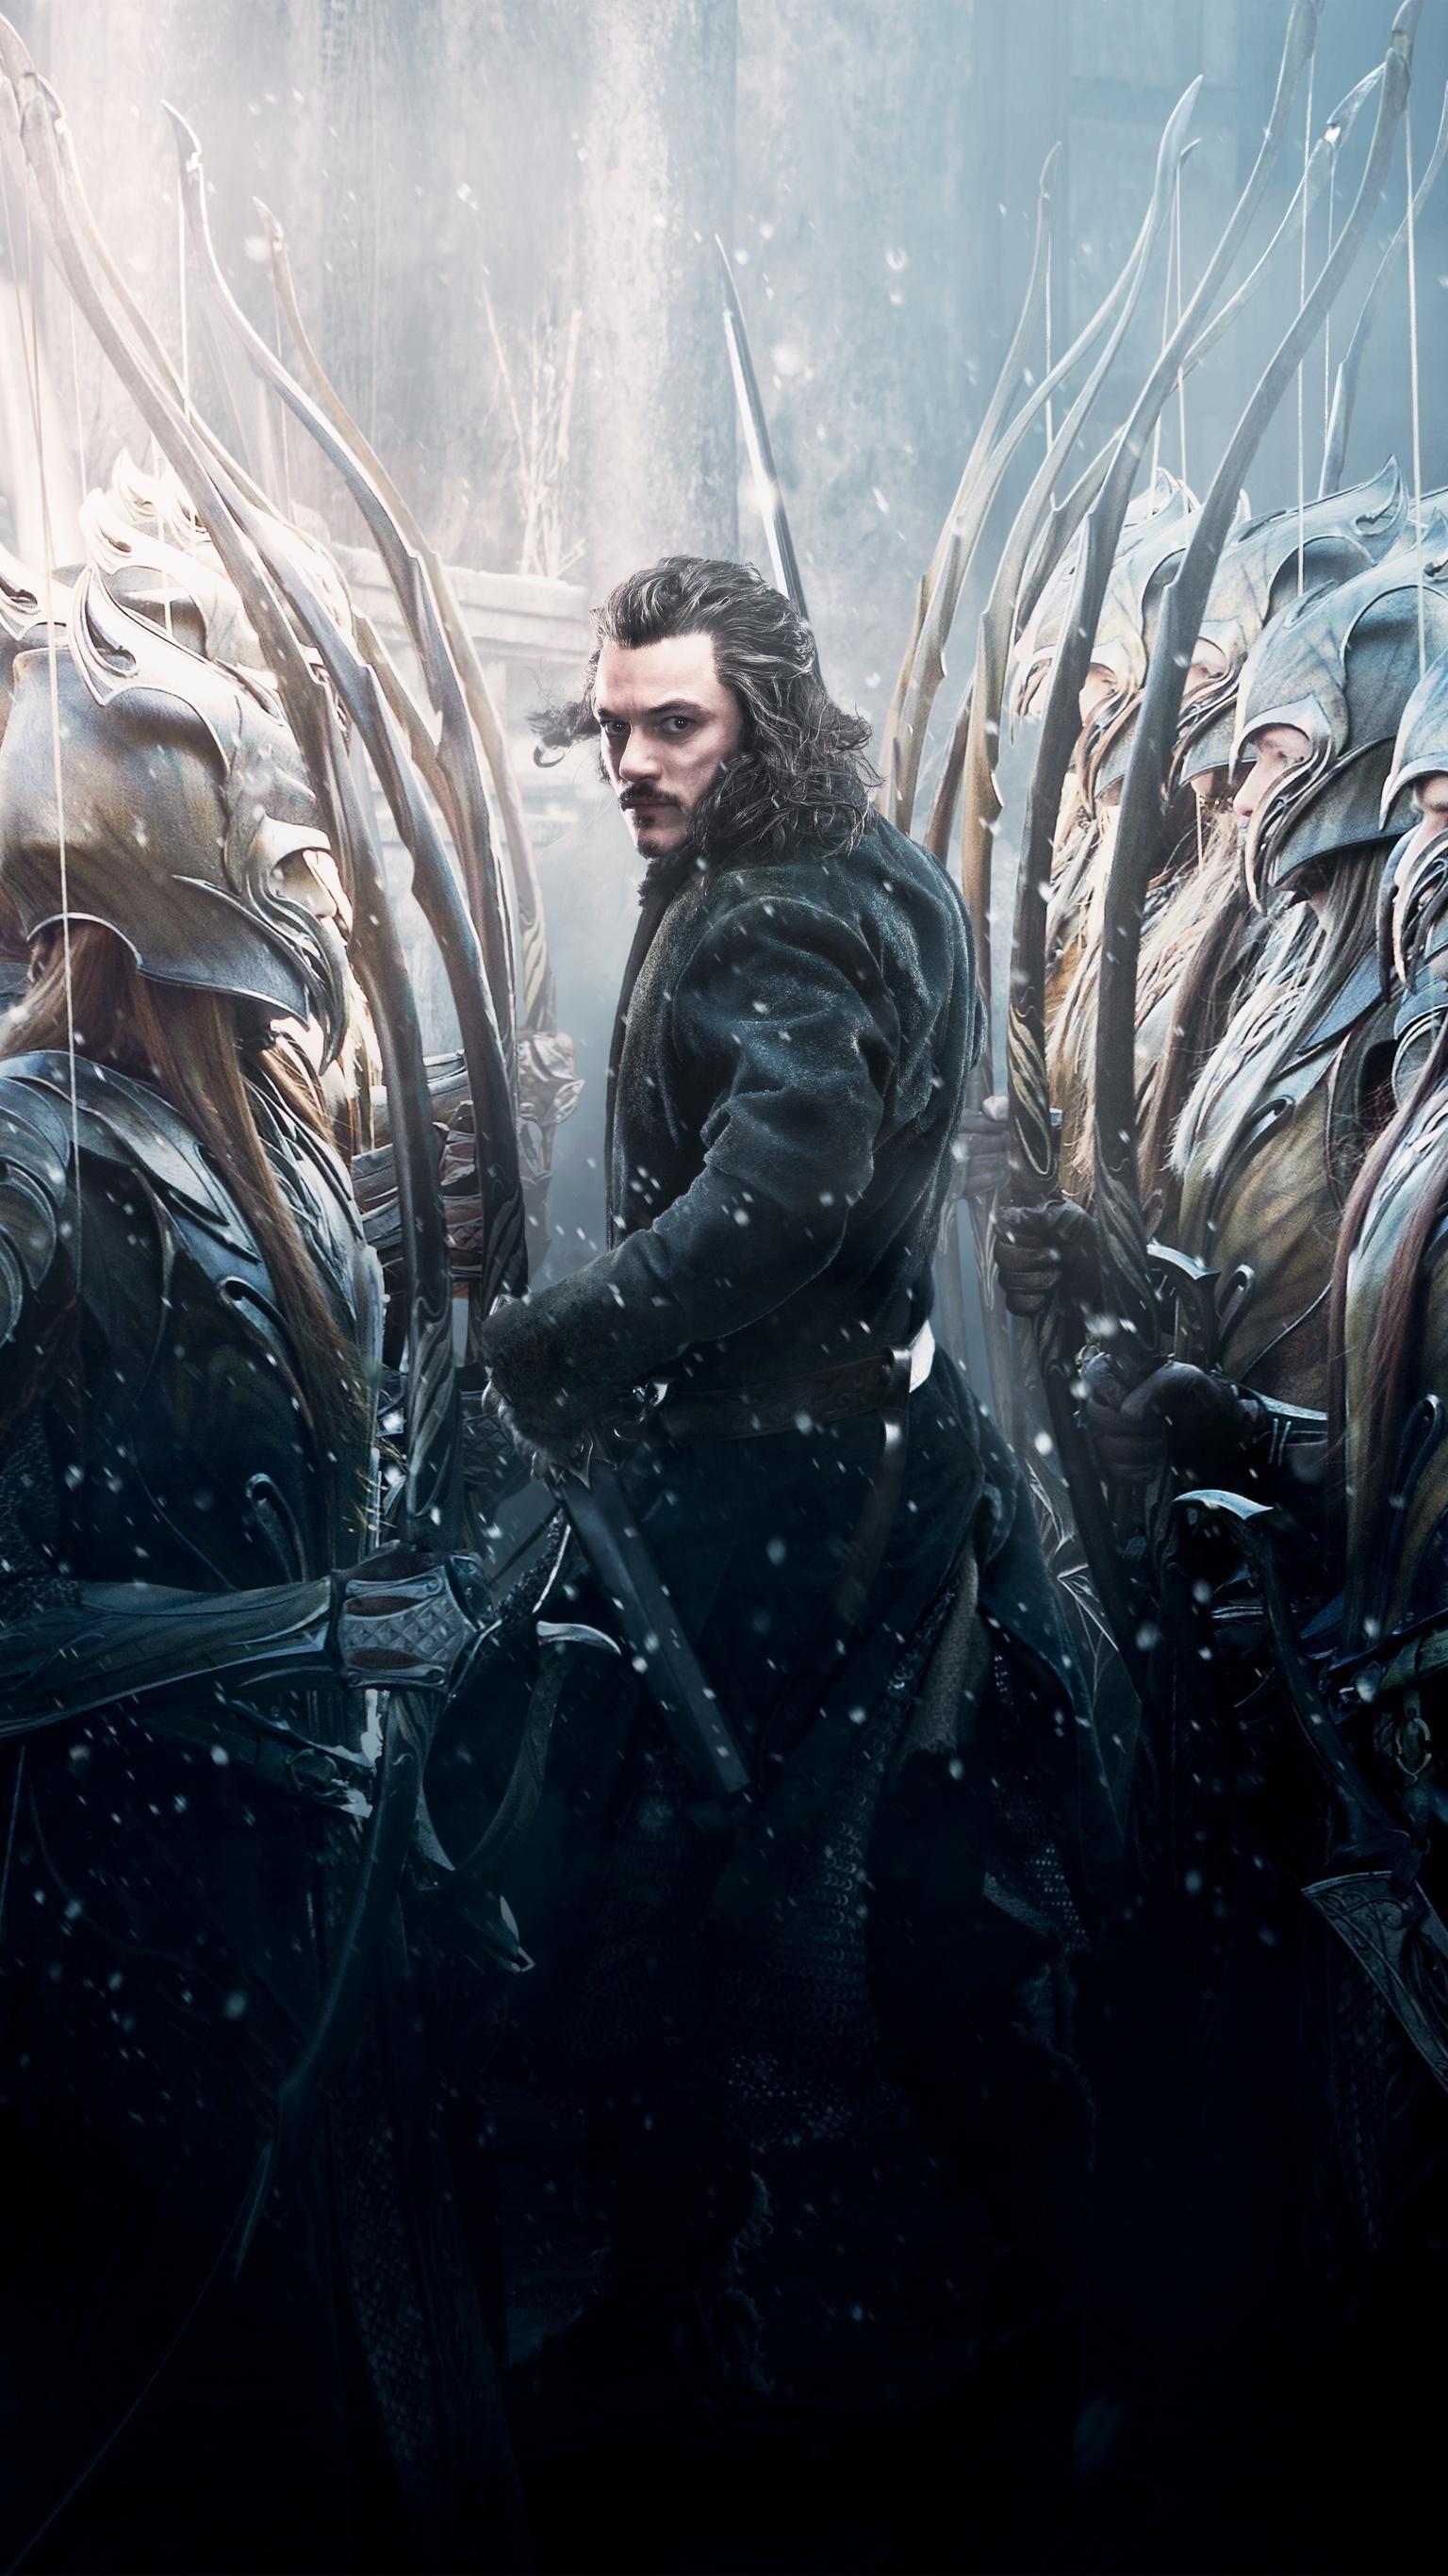 The Hobbit movies wallpaper, Battle of the Five Armies, Epic conclusion, Artistic background, 1540x2740 HD Handy